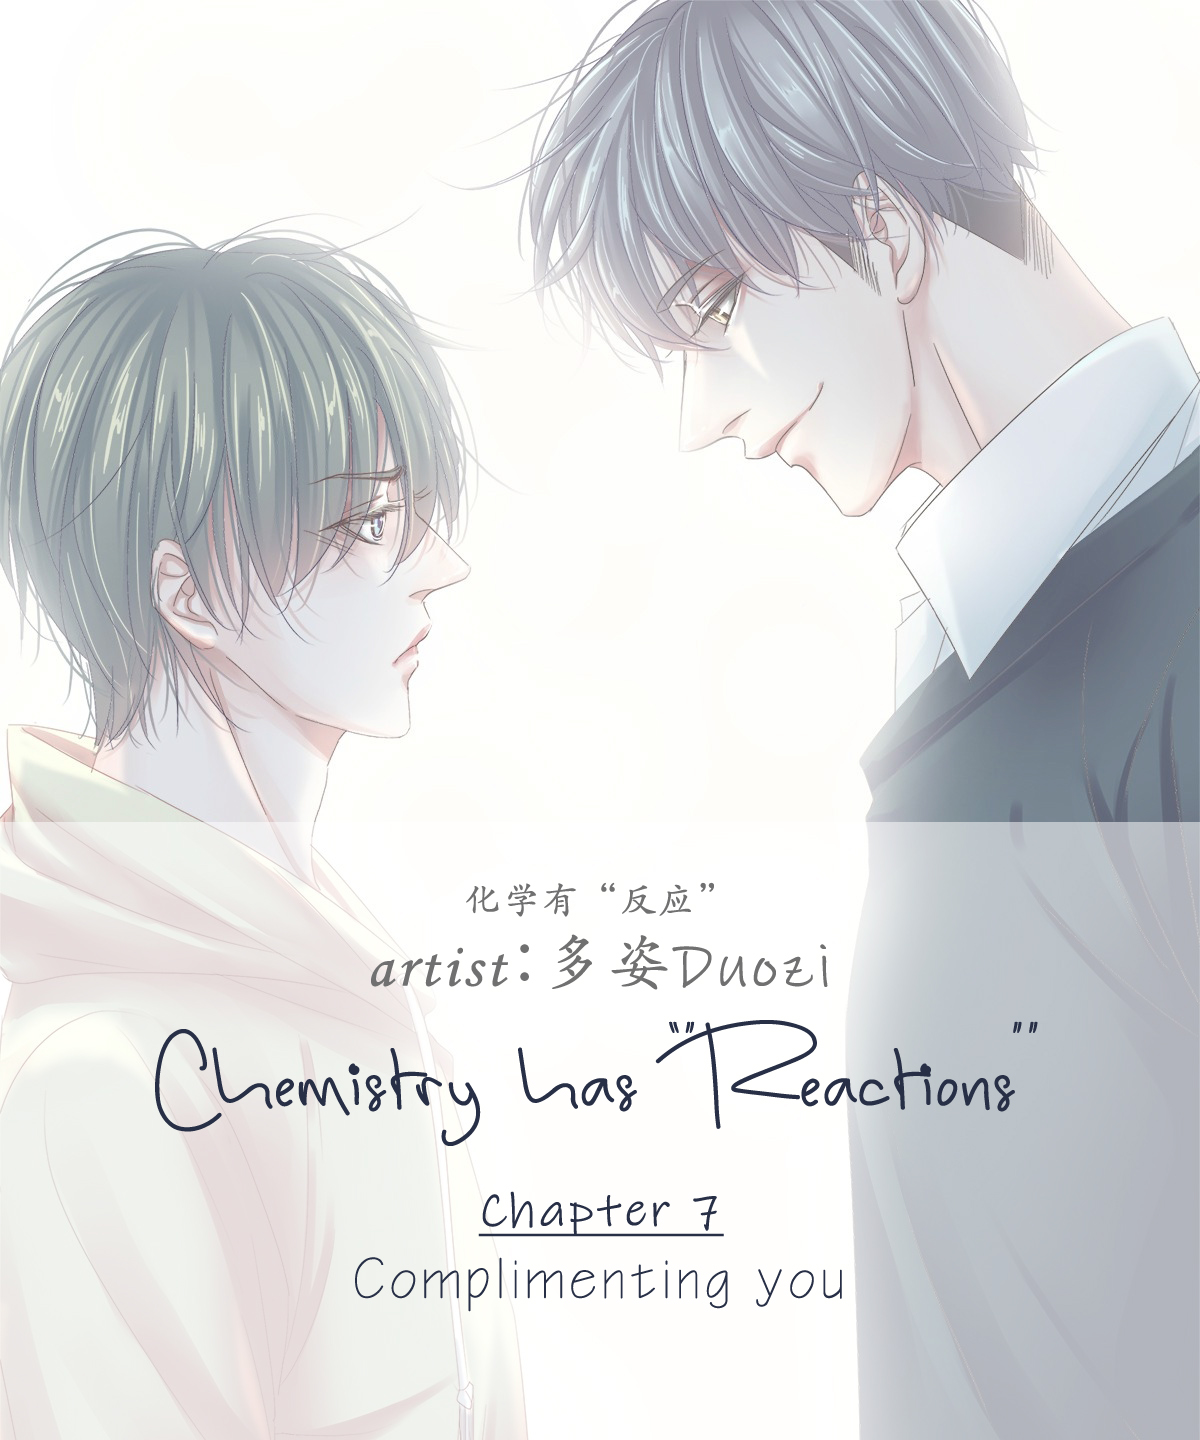 Chemistry has "Reactions" Vol. 1 Ch. 7